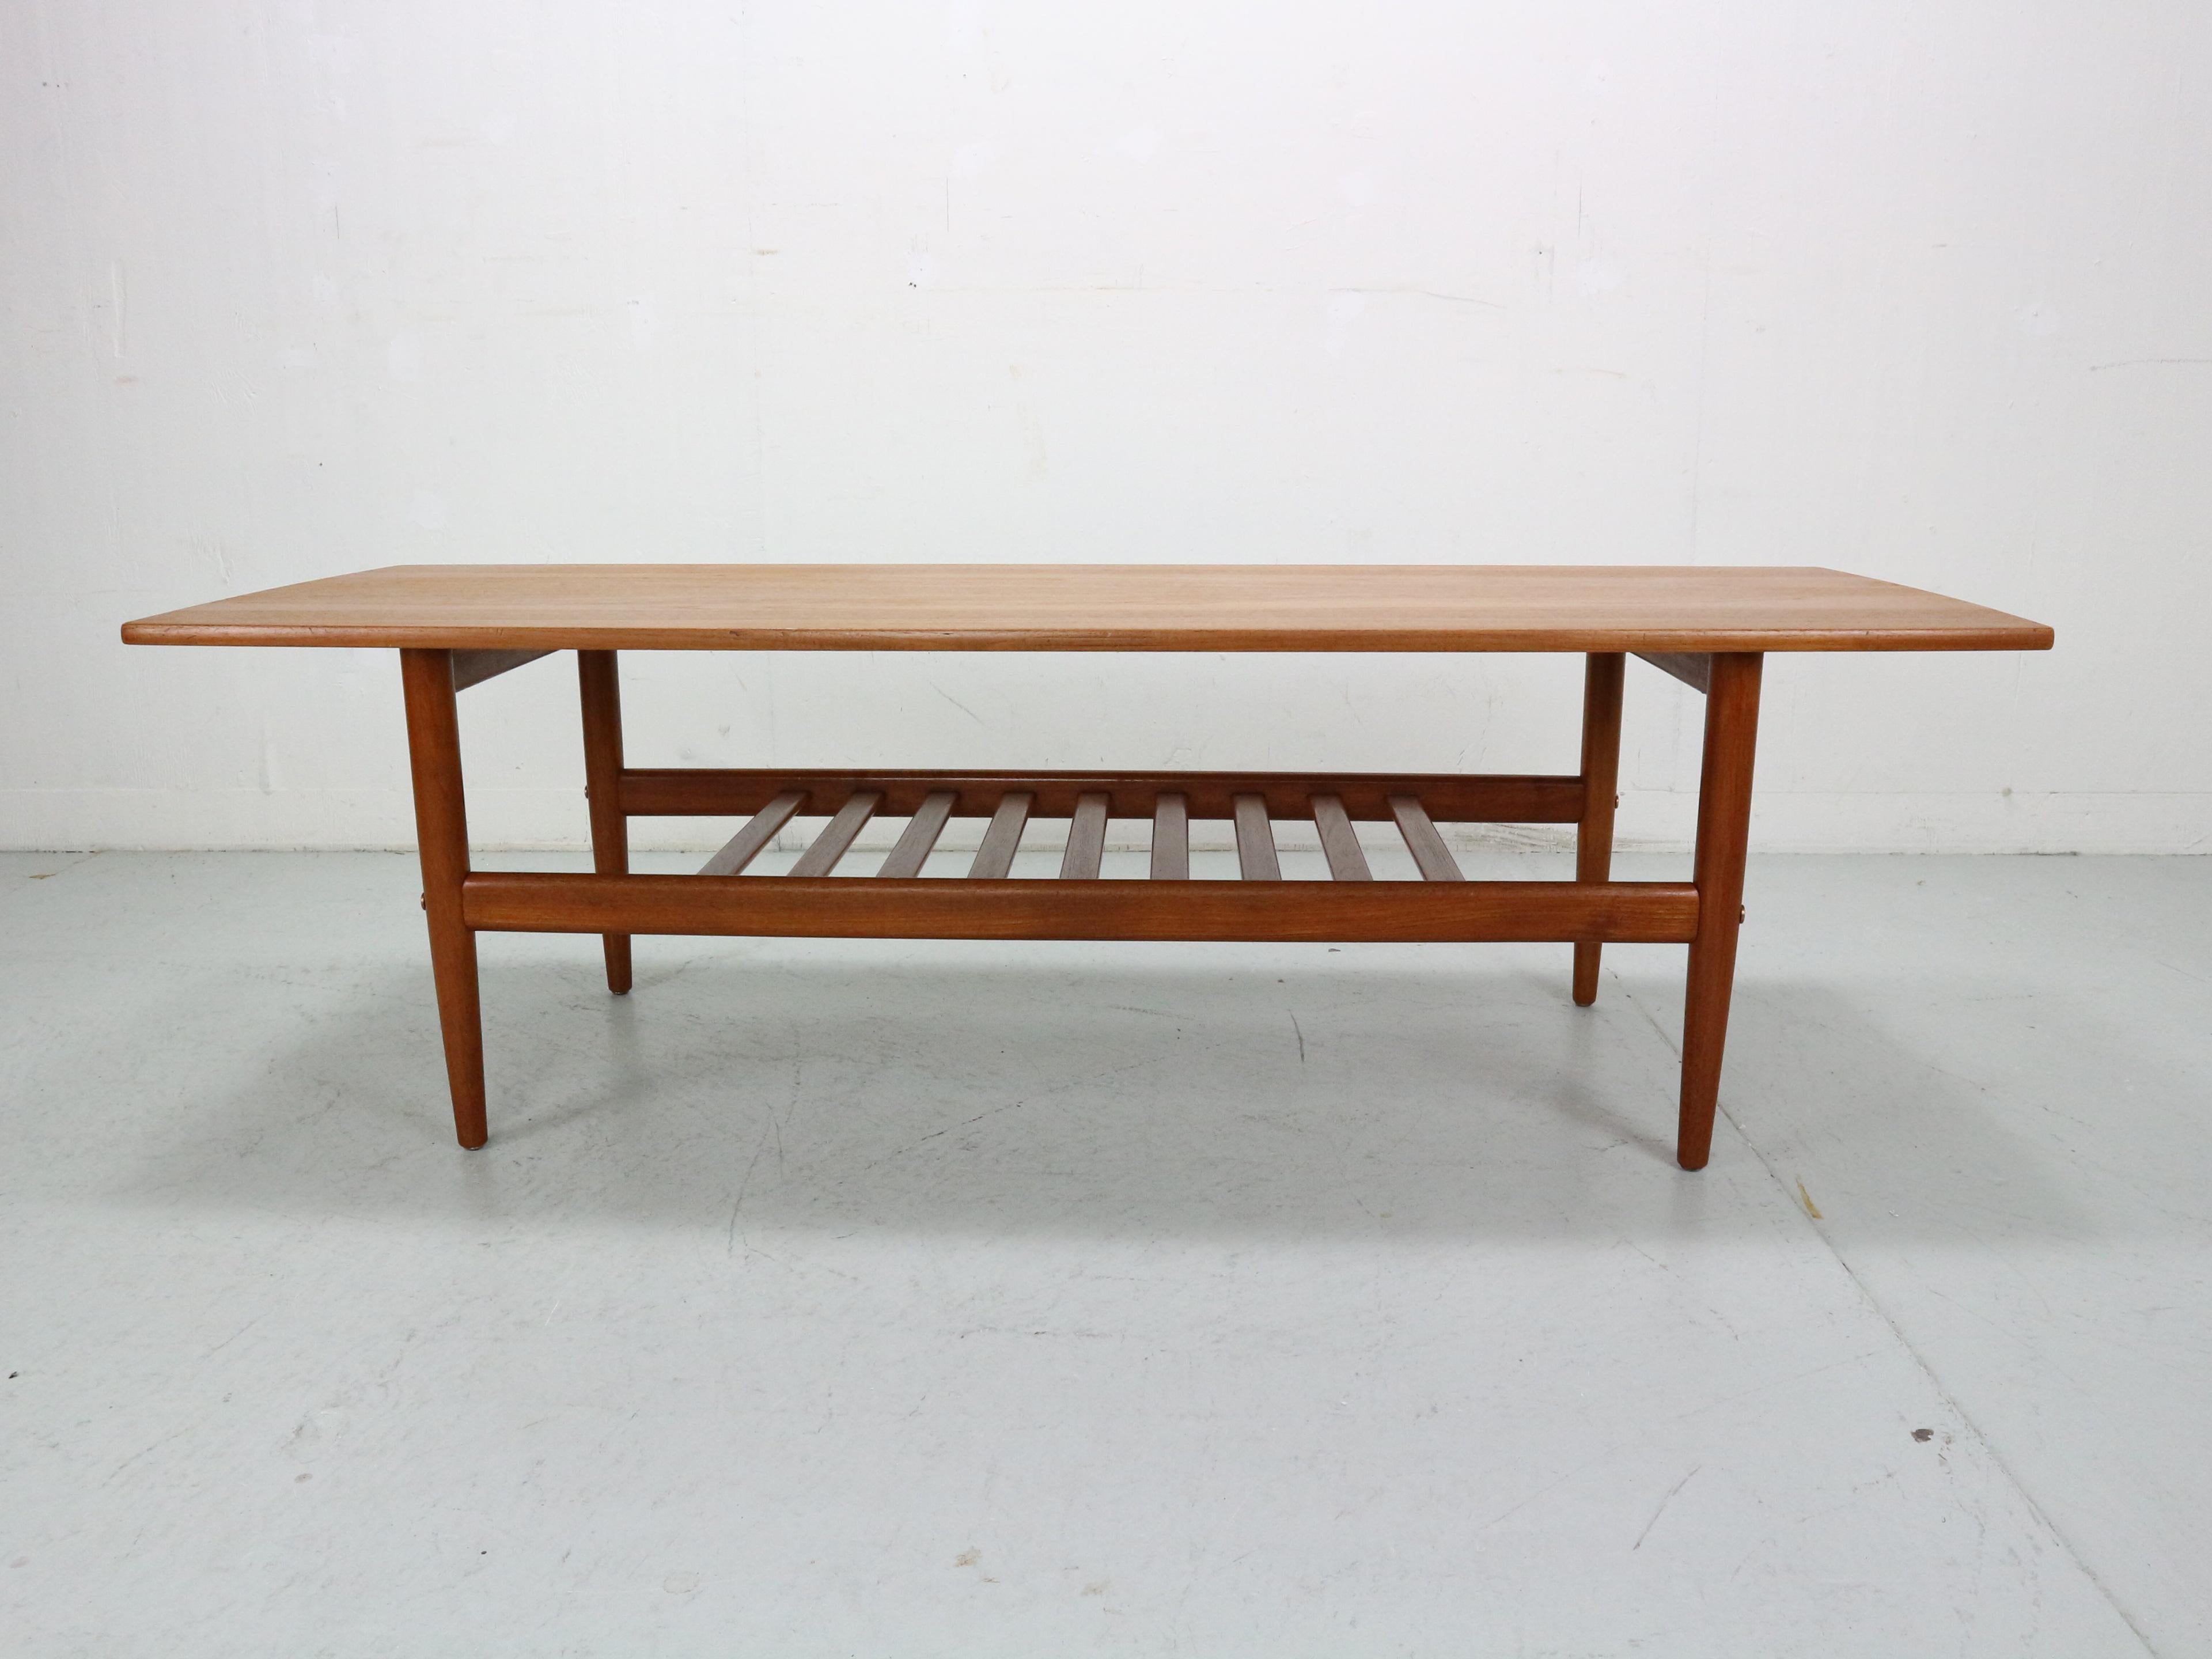 A stunning mid-century modern, teak Danish coffee table by Grete Jalk for Glostrup Mobelfabrik, circa 1960's. Features a rectangular top with an unique slatted lower level floating shelf adds additional space for storage. The table rests on stylish